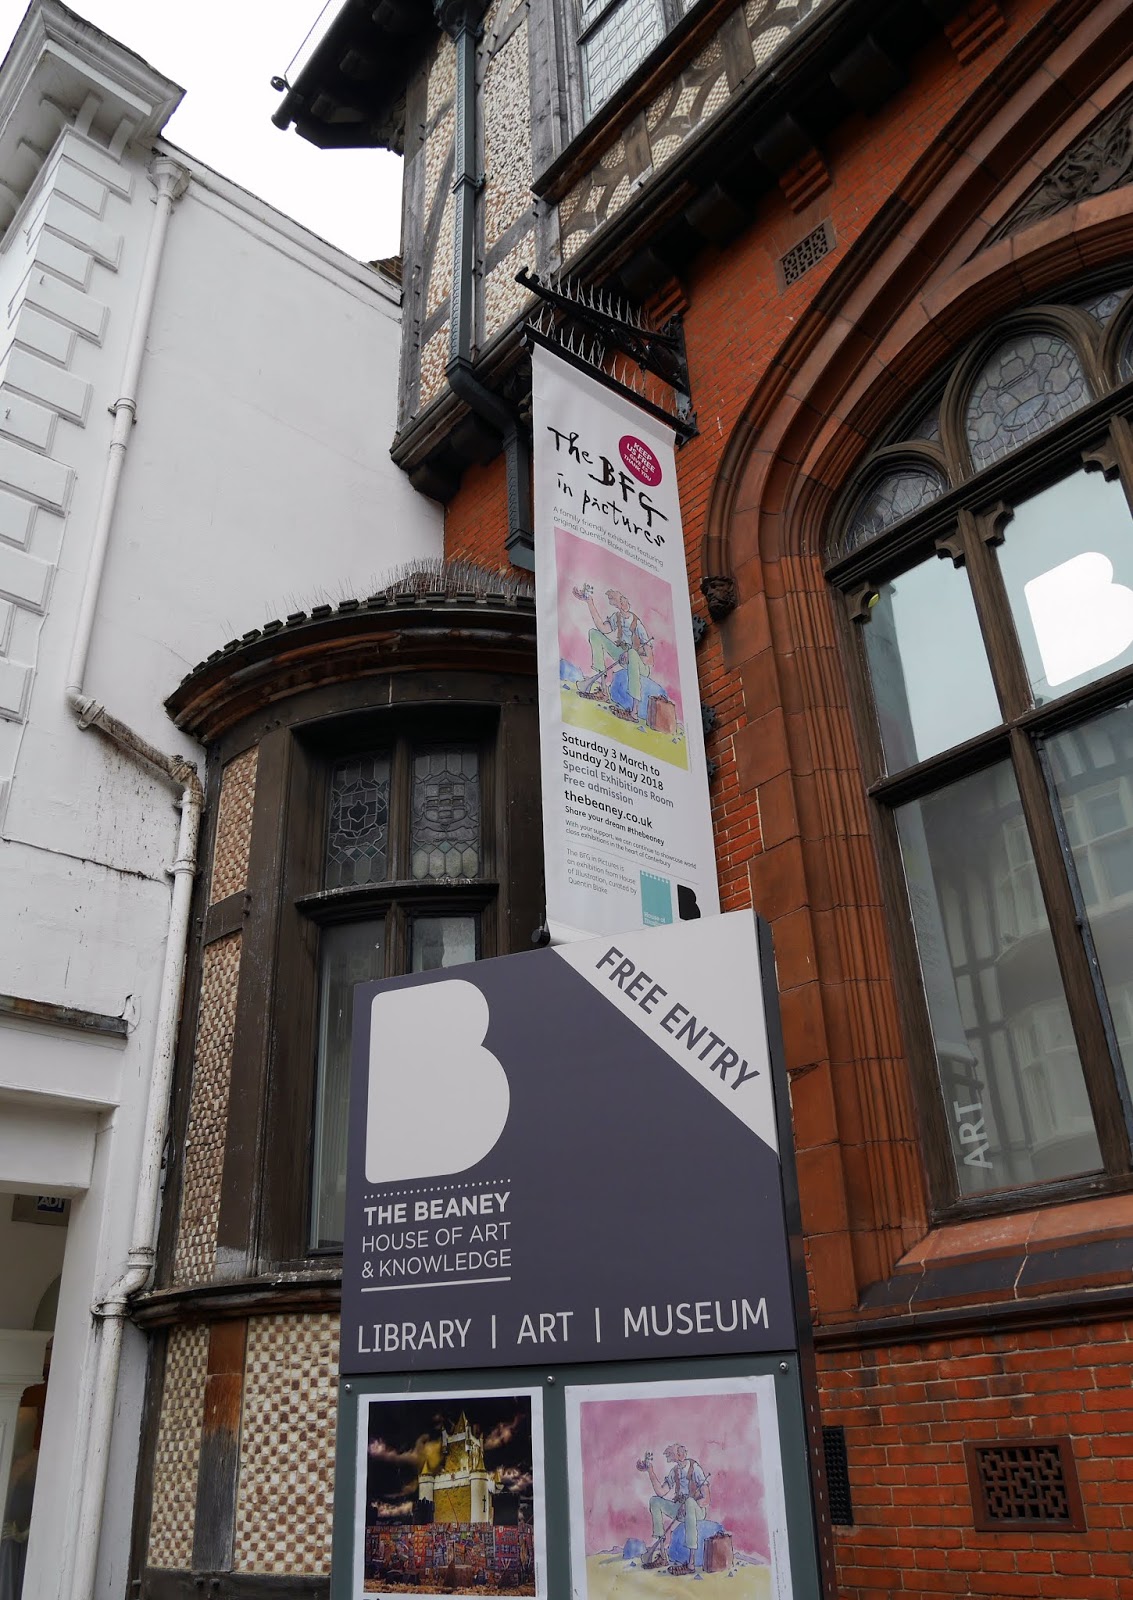 The Beaney House of Art & Knowledge, Canterbury